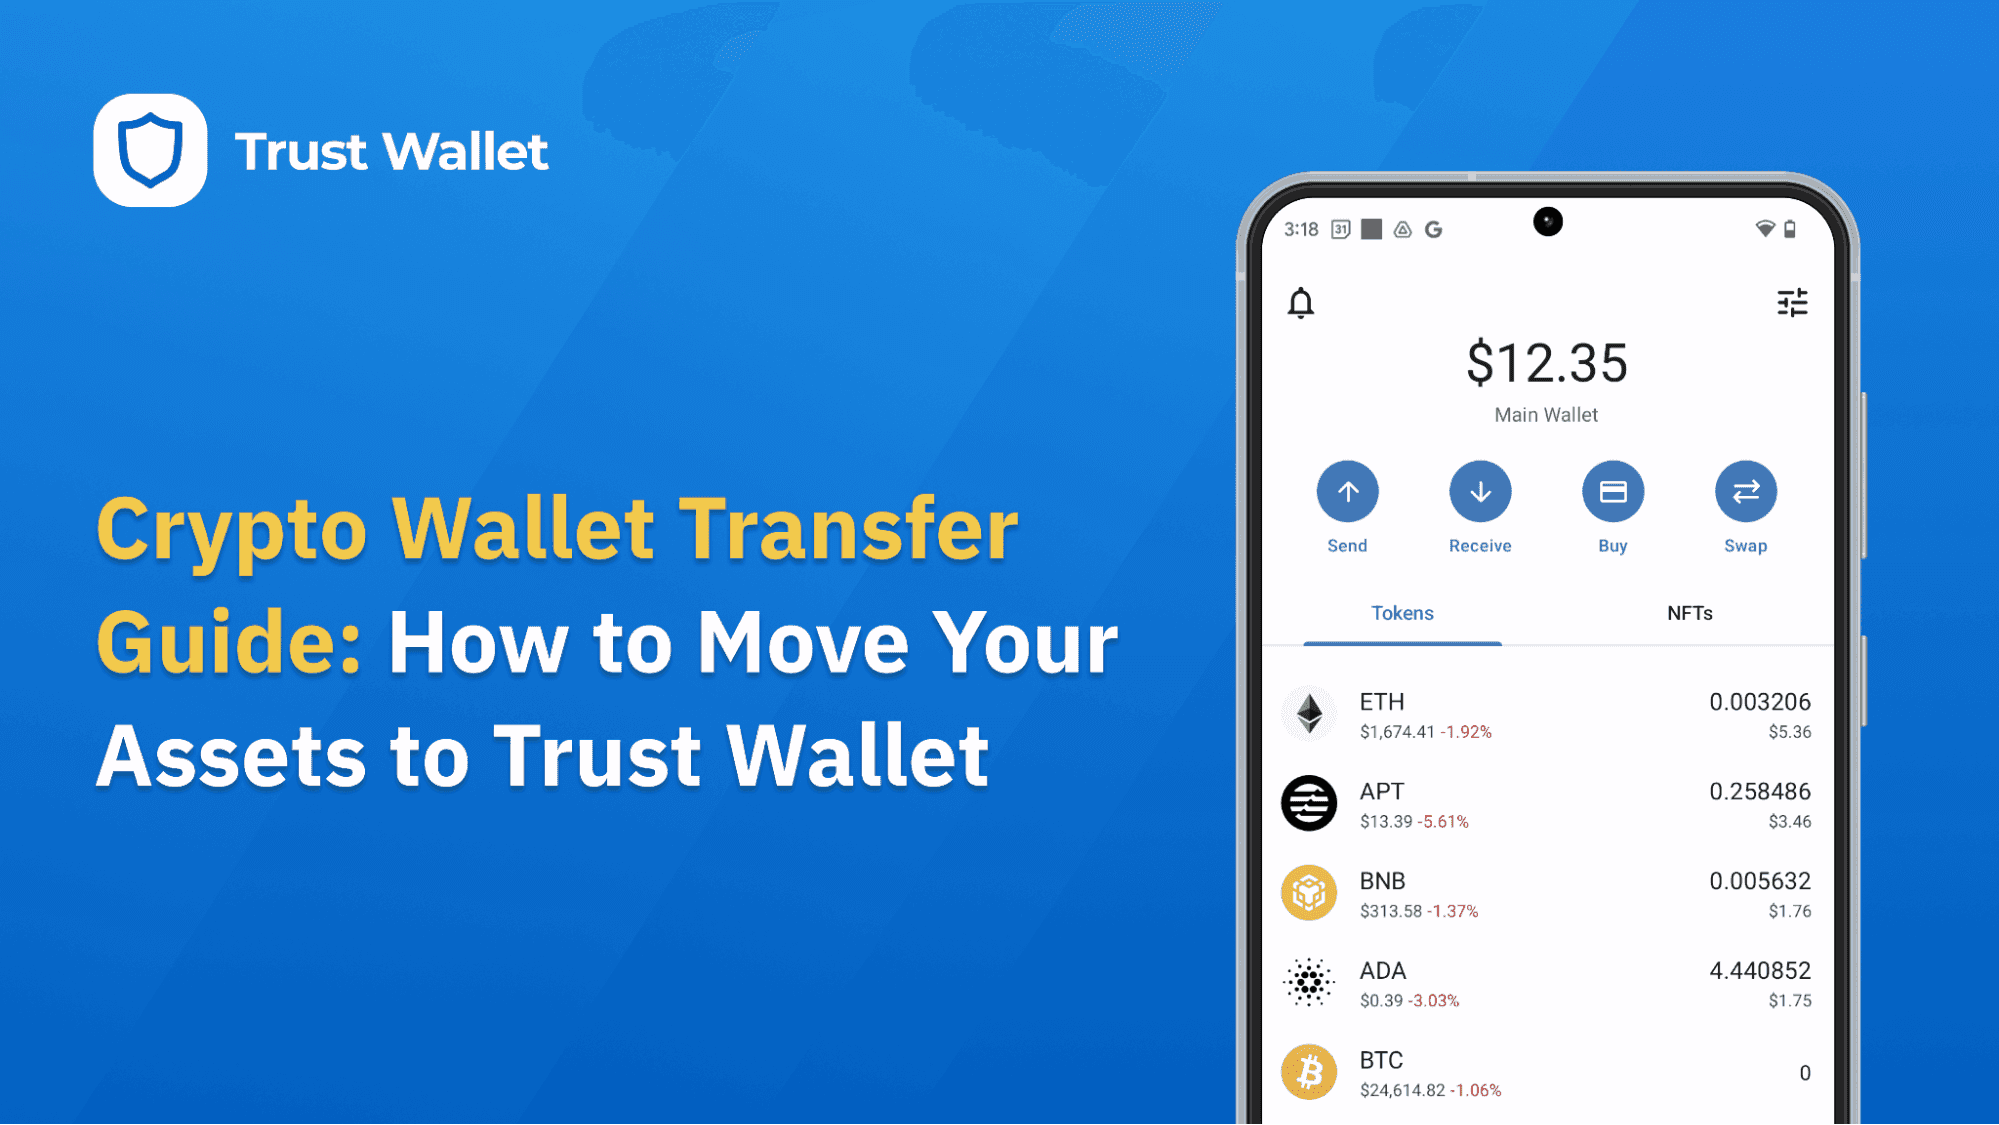 A Step-by-Step Guide on How to Get a Crypto Wallet